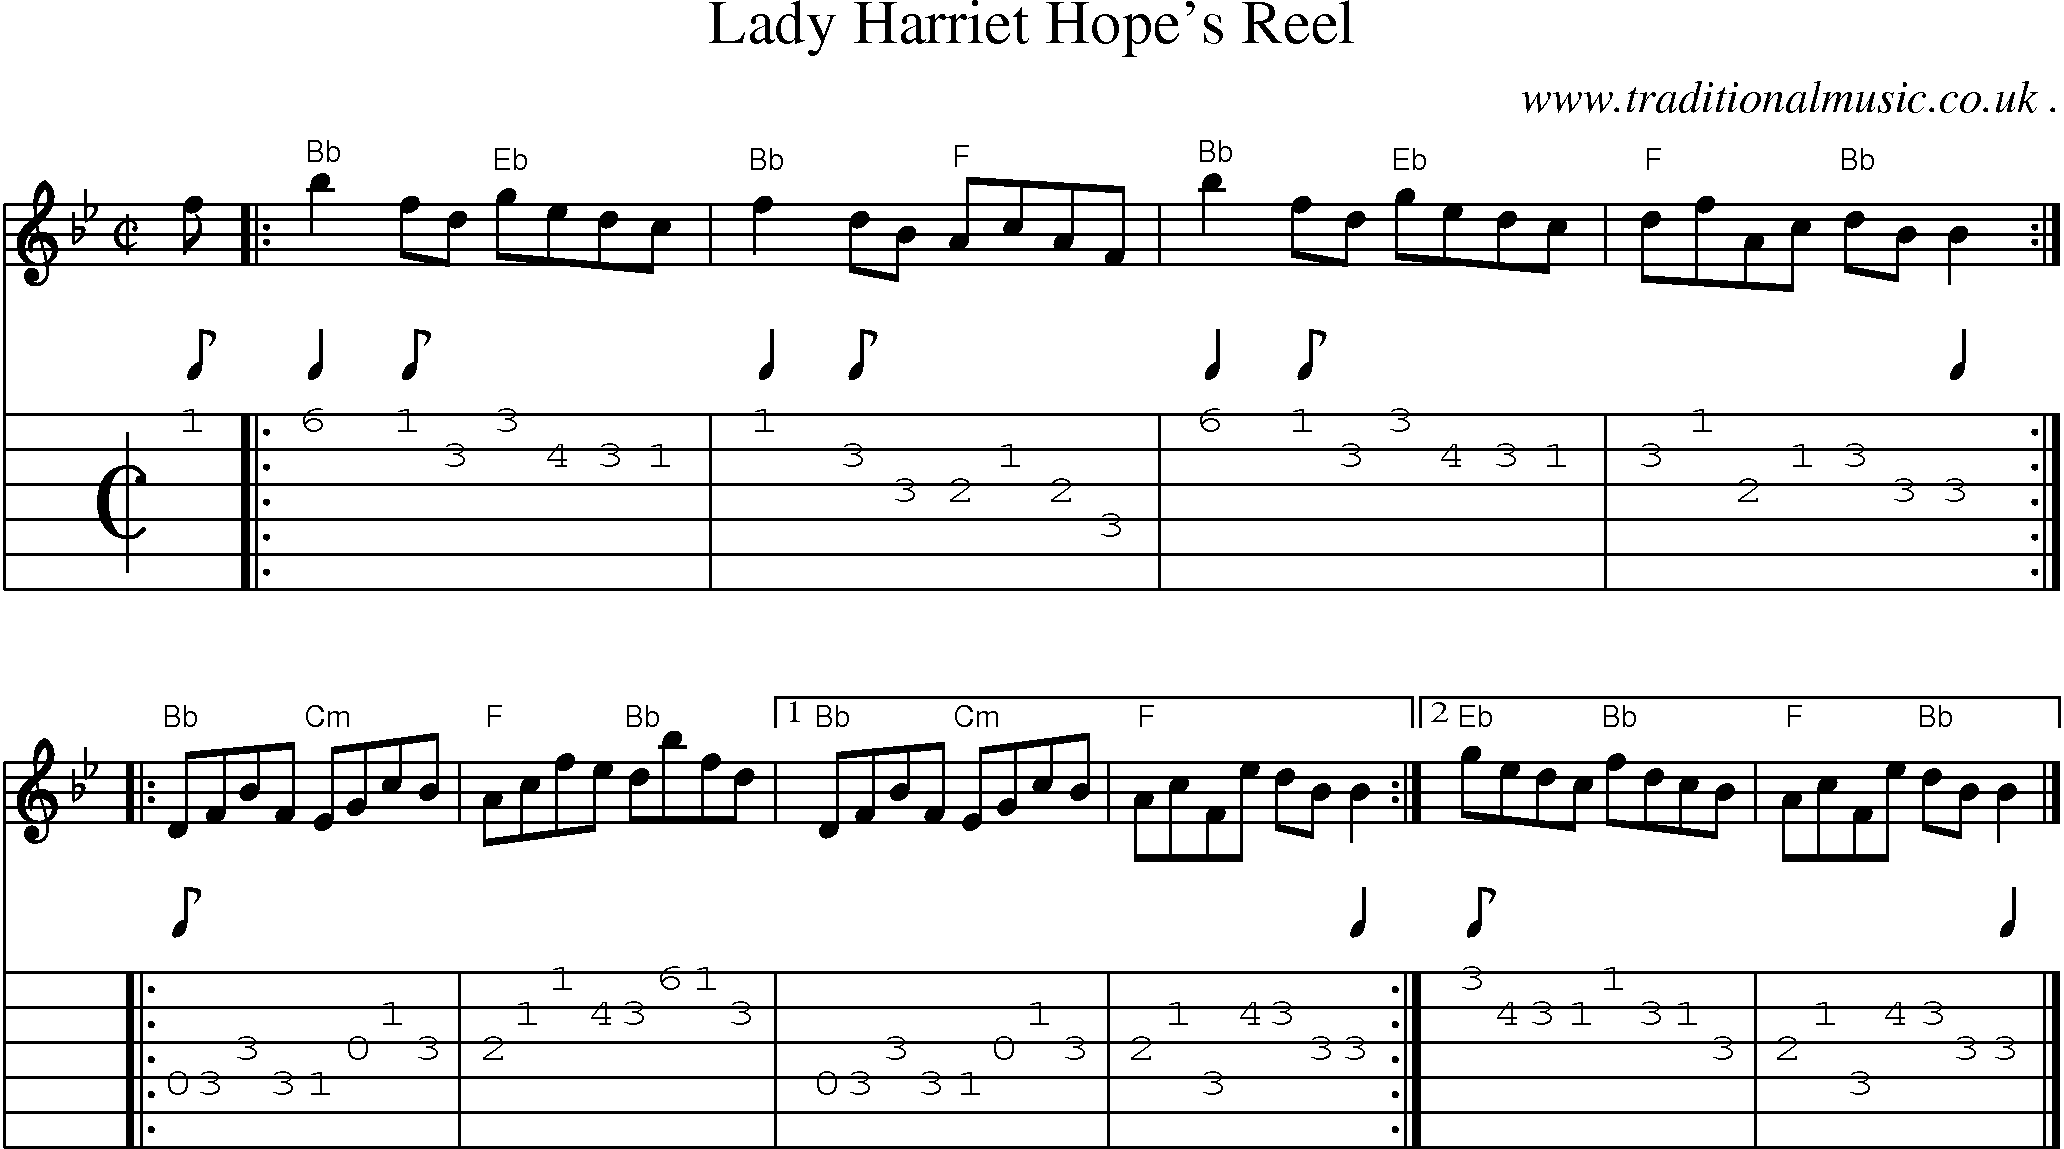 Sheet-music  score, Chords and Guitar Tabs for Lady Harriet Hopes Reel